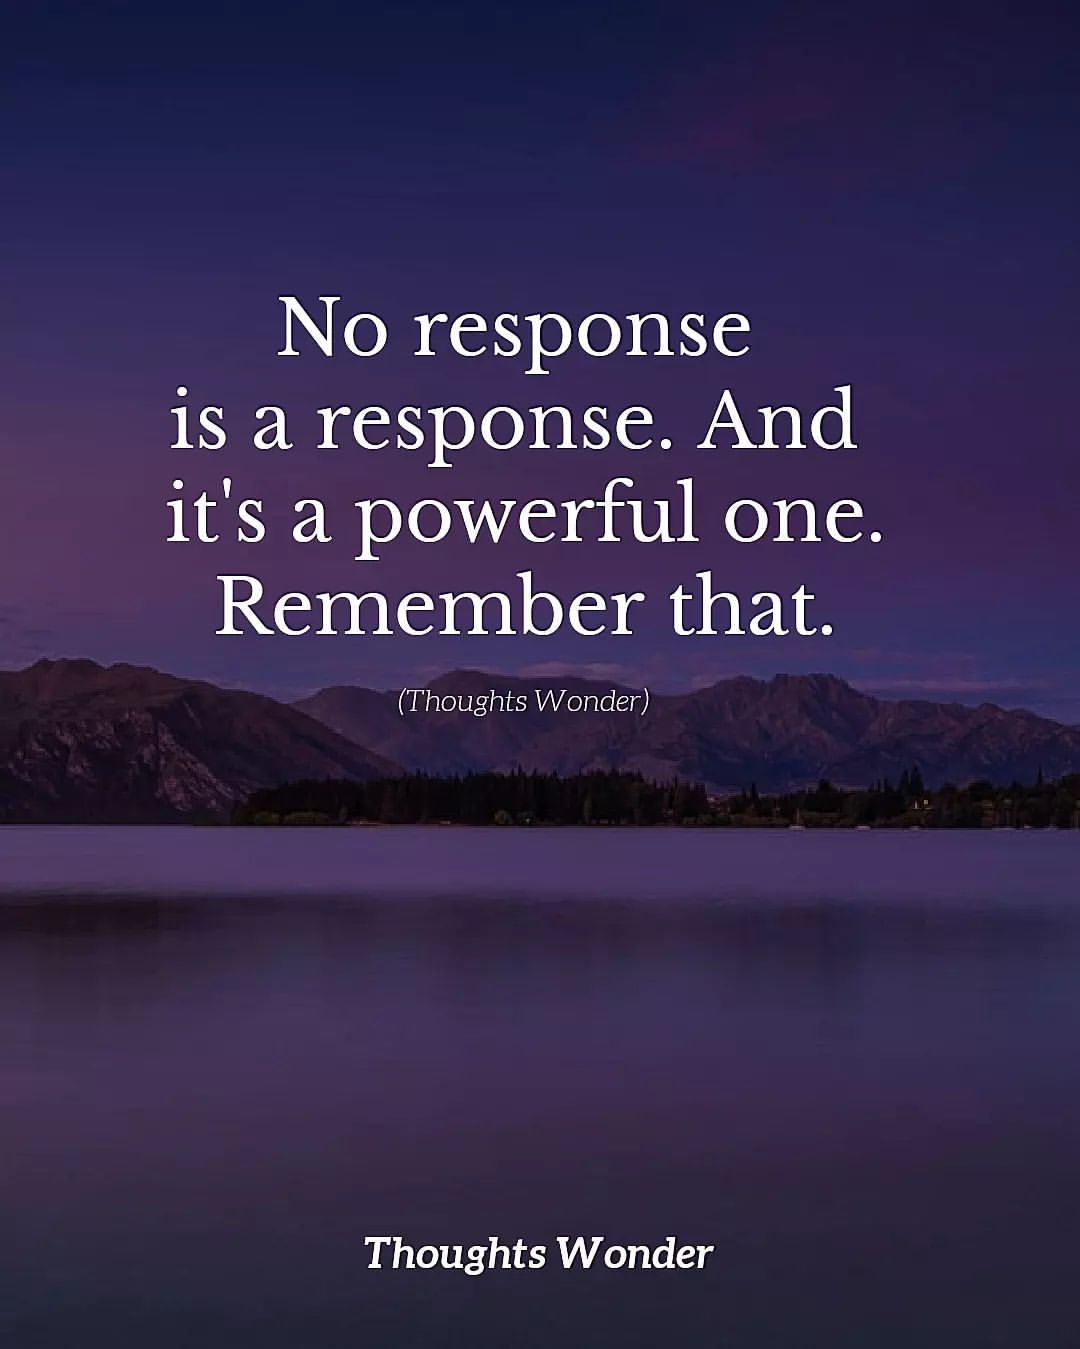 No response is a response. And it's a powerful one. Remember that.